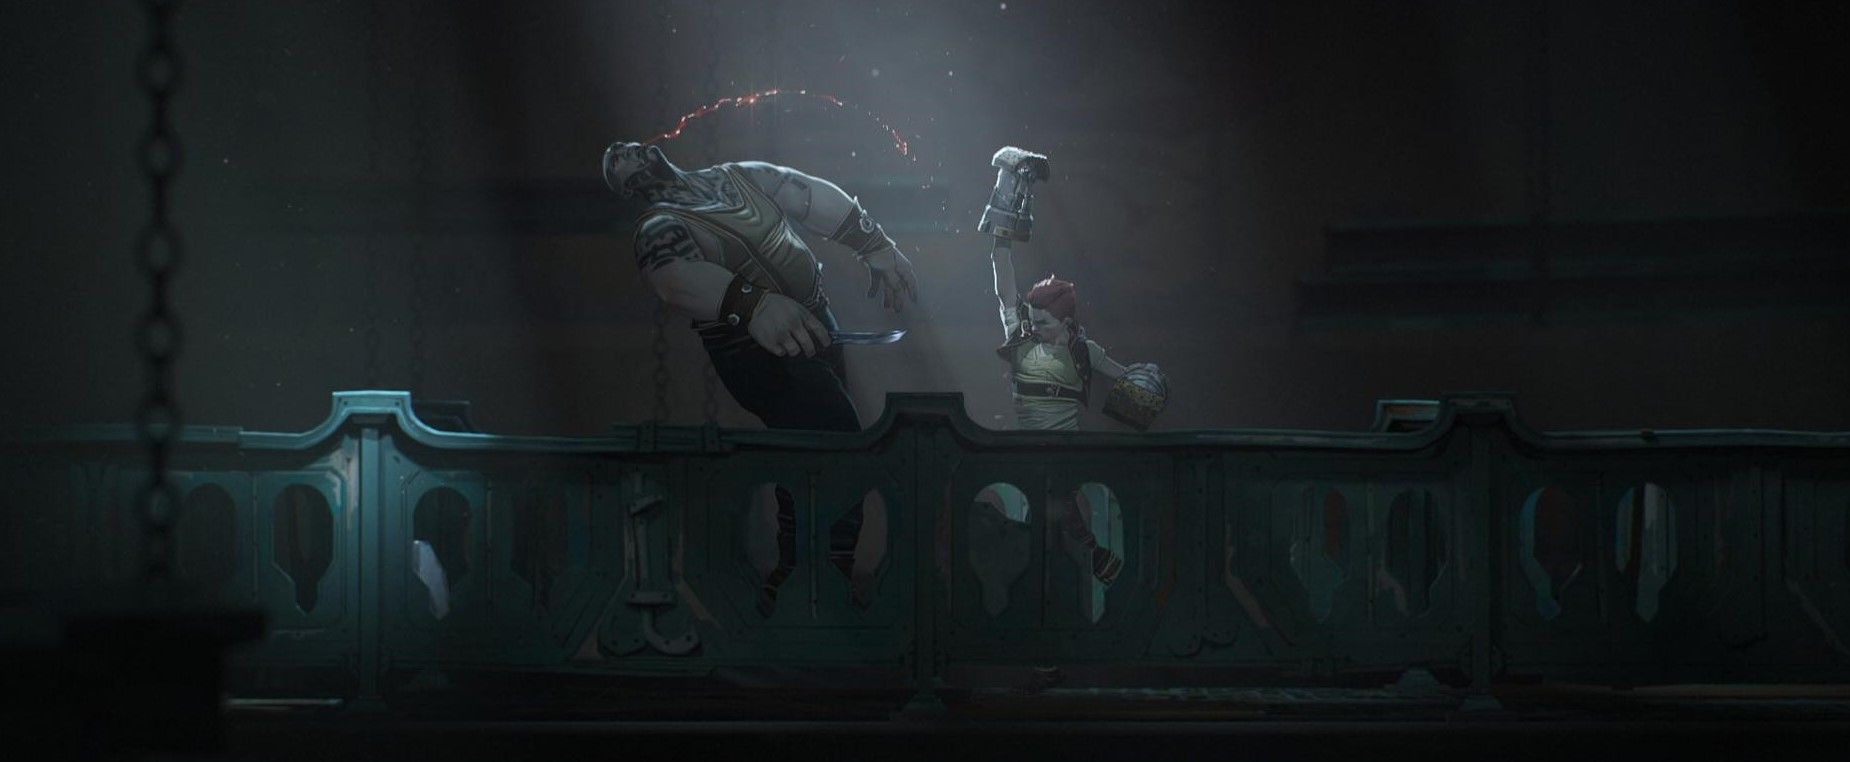 Vi punching enemy with gauntlets on a bridge